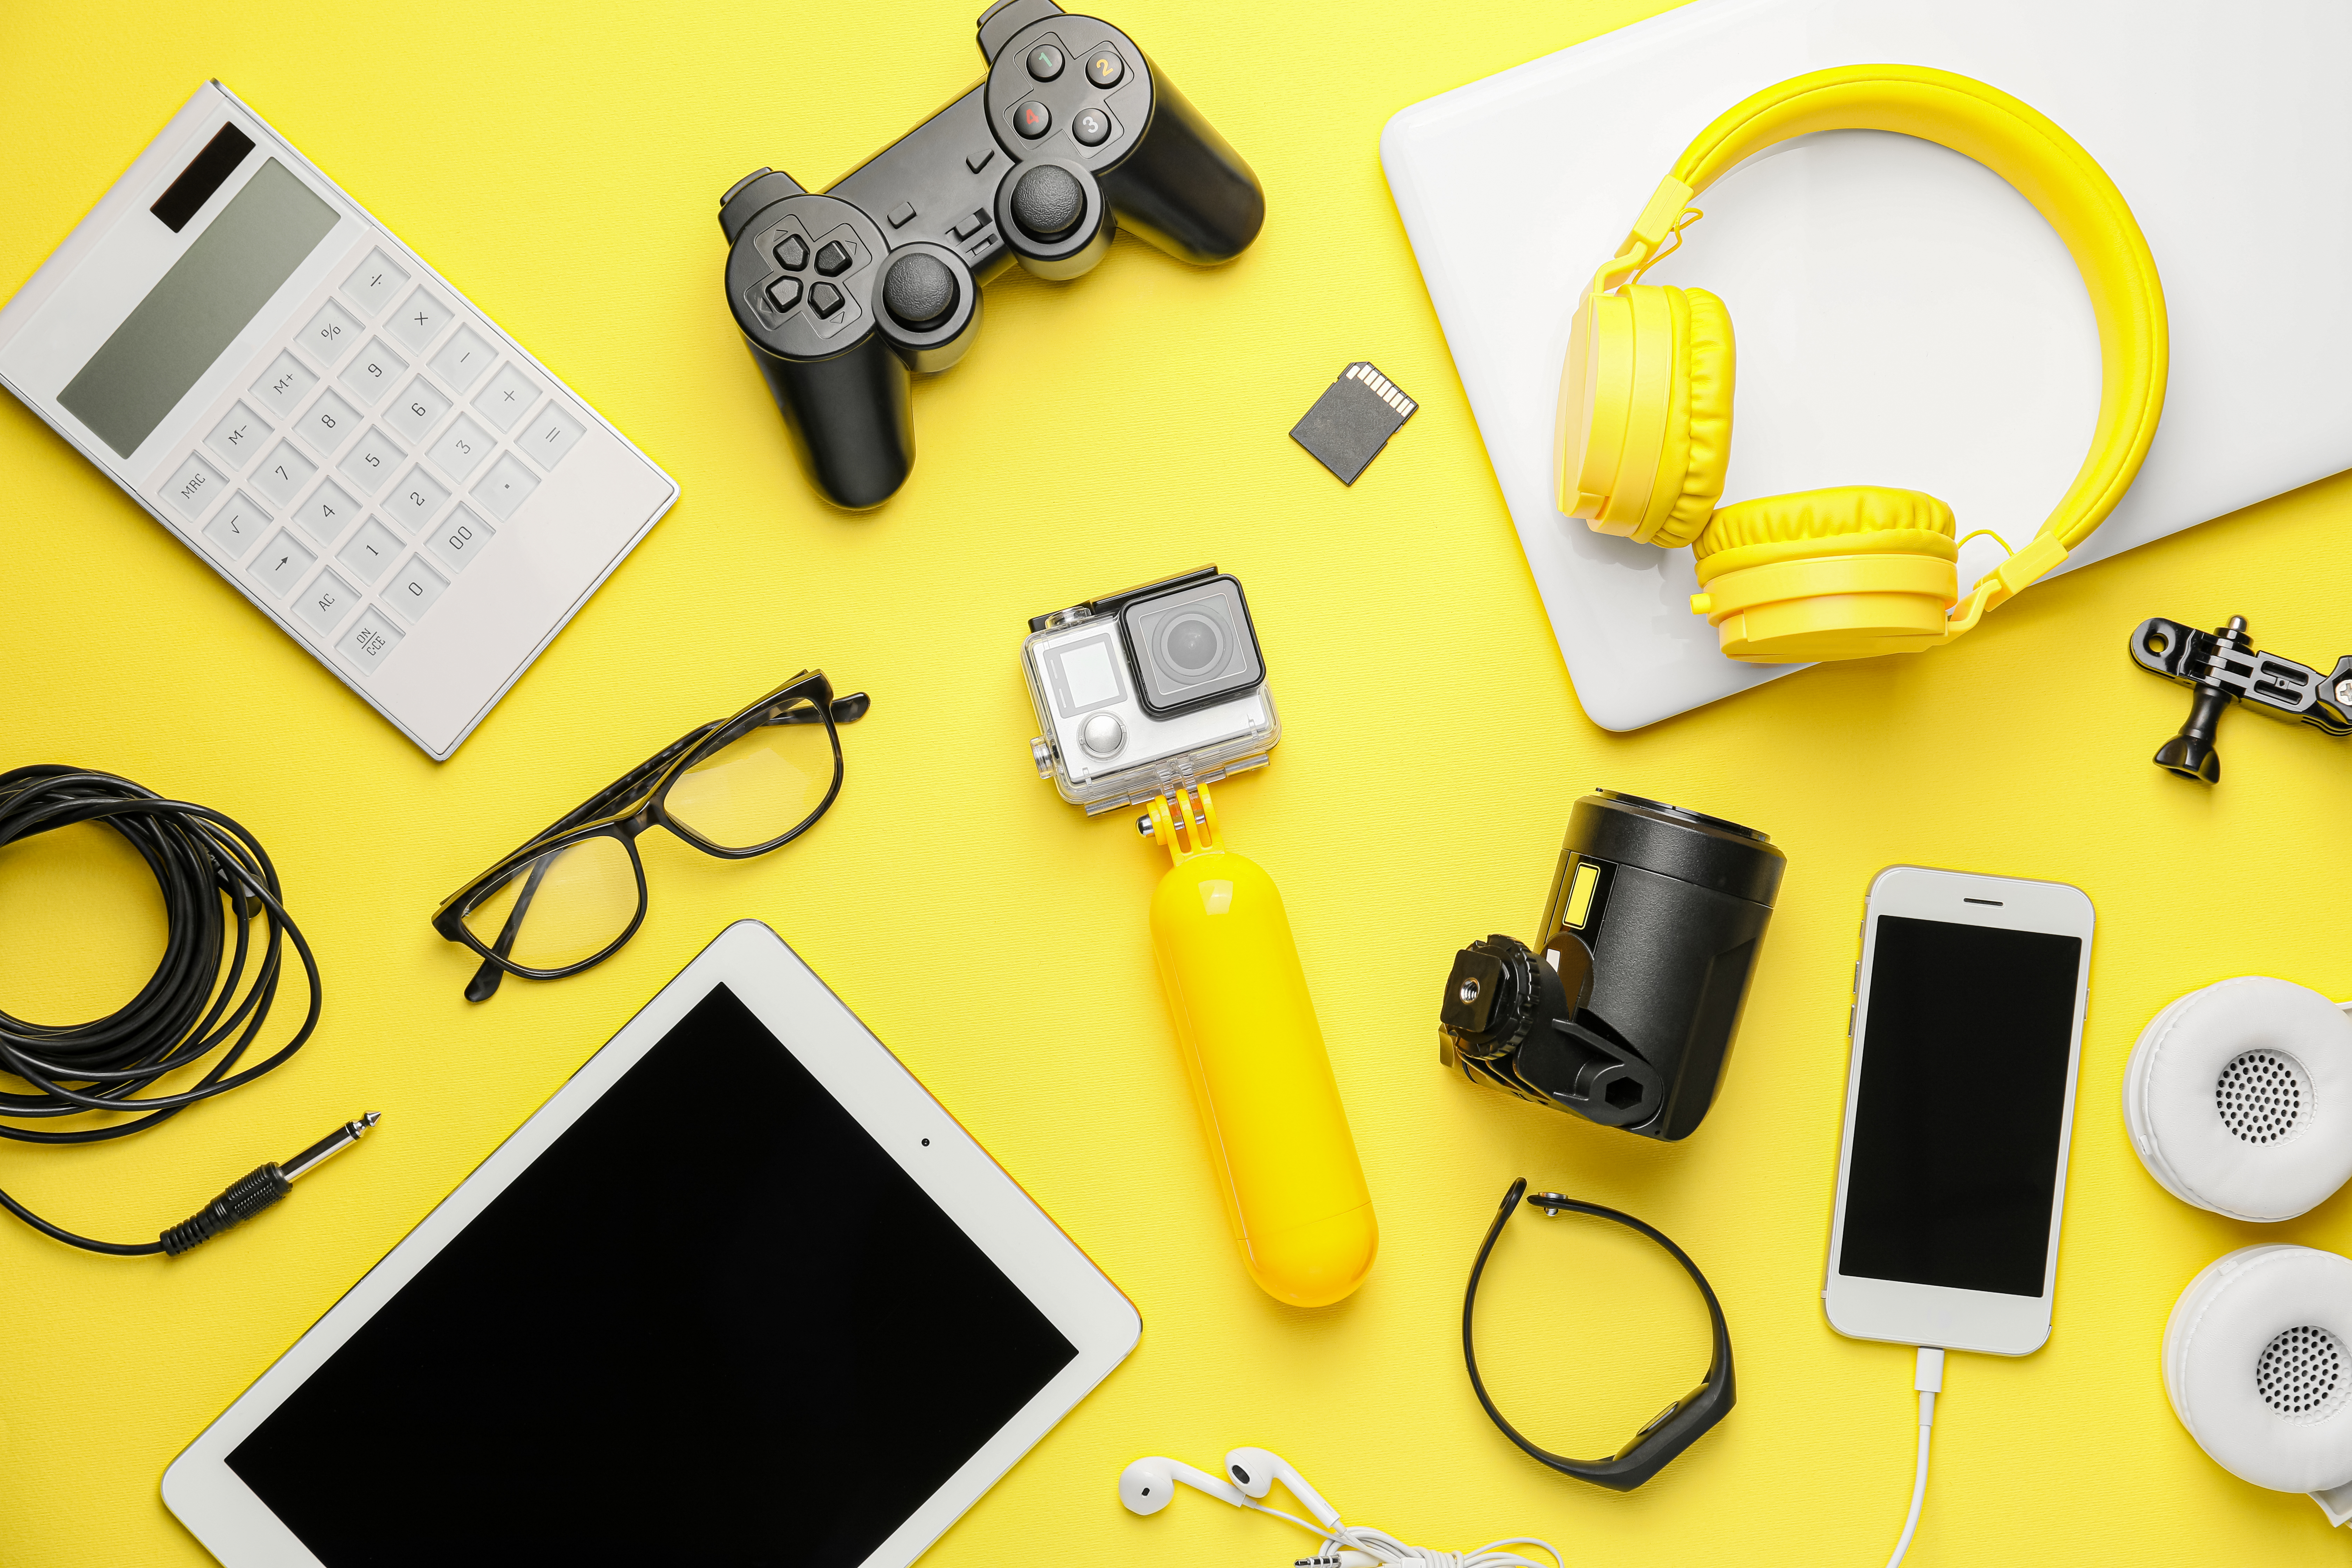 An assortment of gadgets on a yellow background with a GoPro camera on a yellow selfie stick in the middle